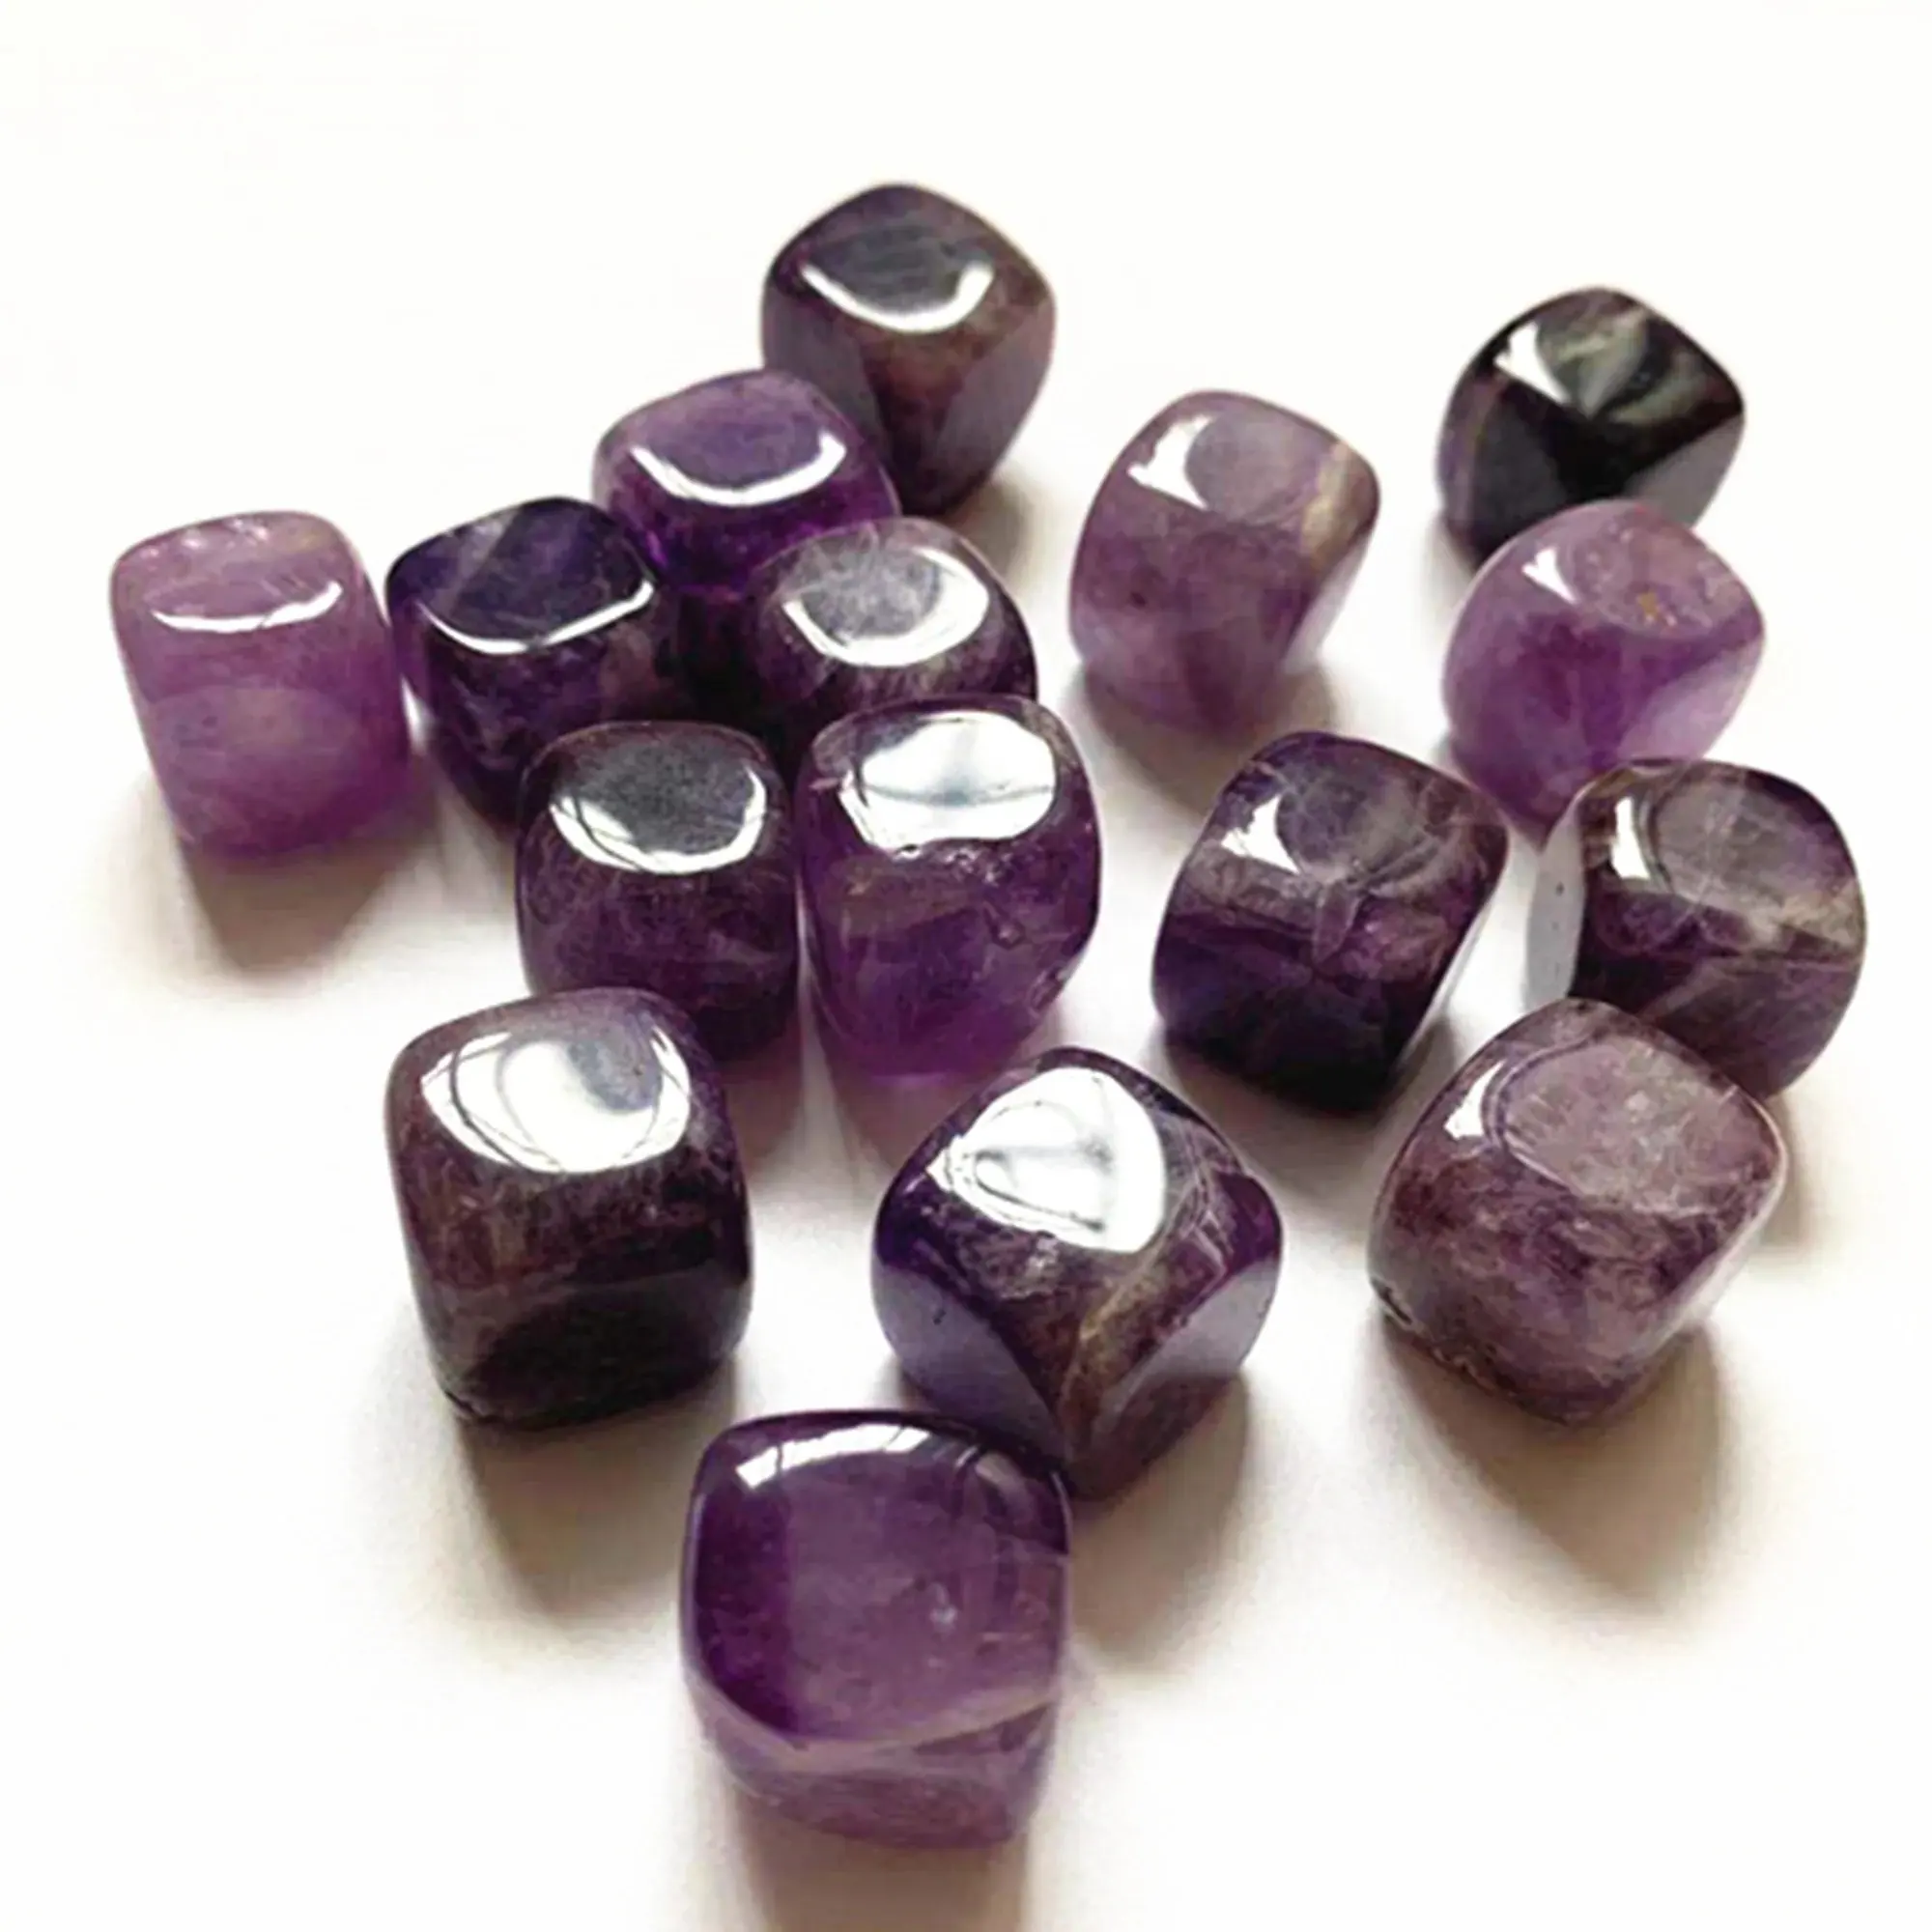 17MM Square Natural Crystal Tumbled Stones Amethyst